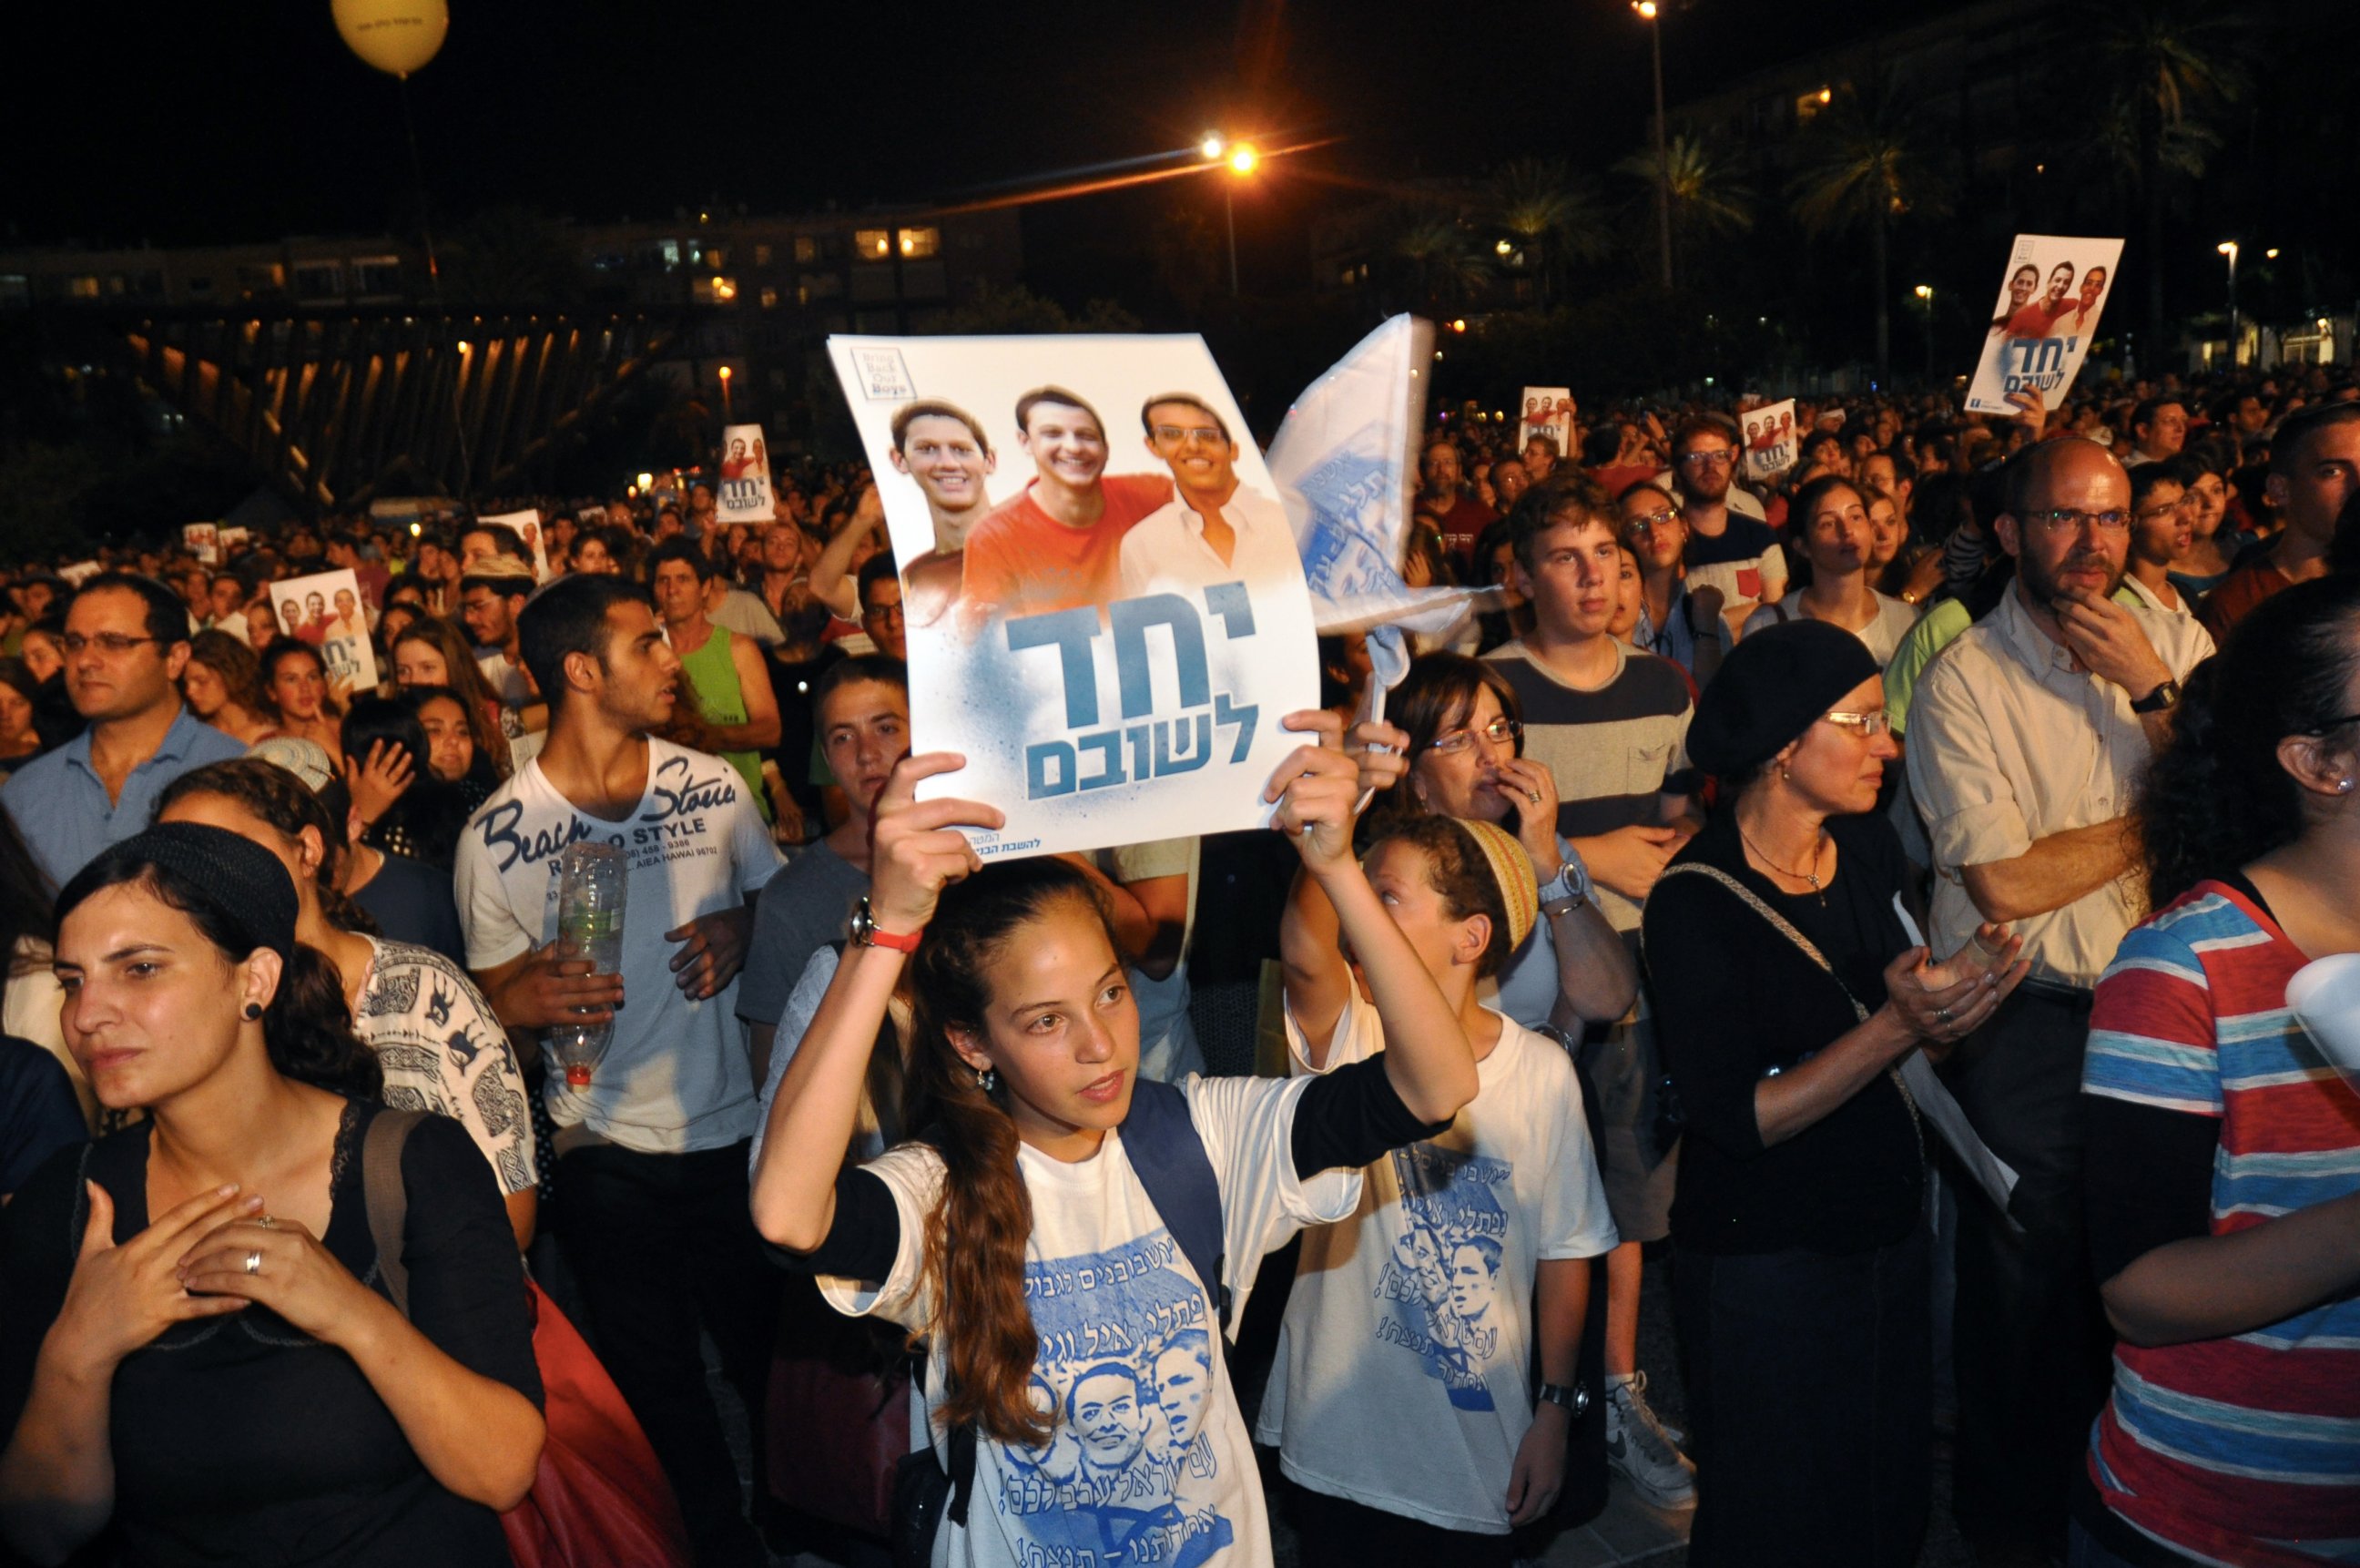 PHOTO: Thousands of people gathered in Tel Aviv's Rabin Square on June 29, 2014 for a rally calling for the release of the three Israeli boys who ?were kidnapped?on June 19 near the West Bank settlement of Gush Etzion. 